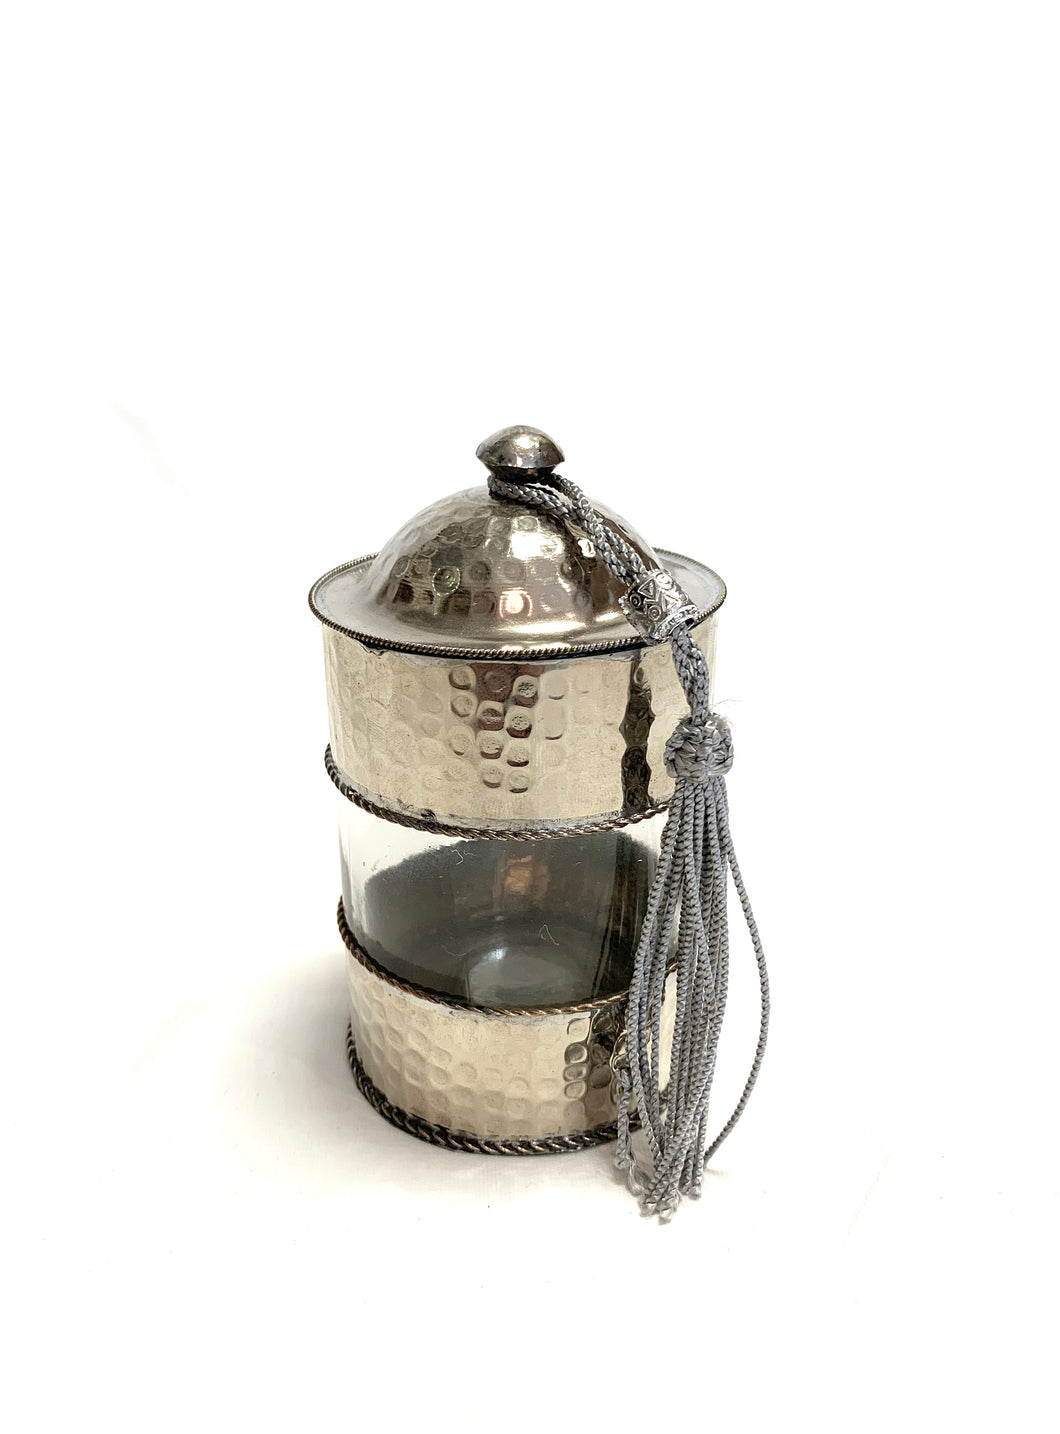 Small handcrafted Moroccan storage pot with beaten metal lid